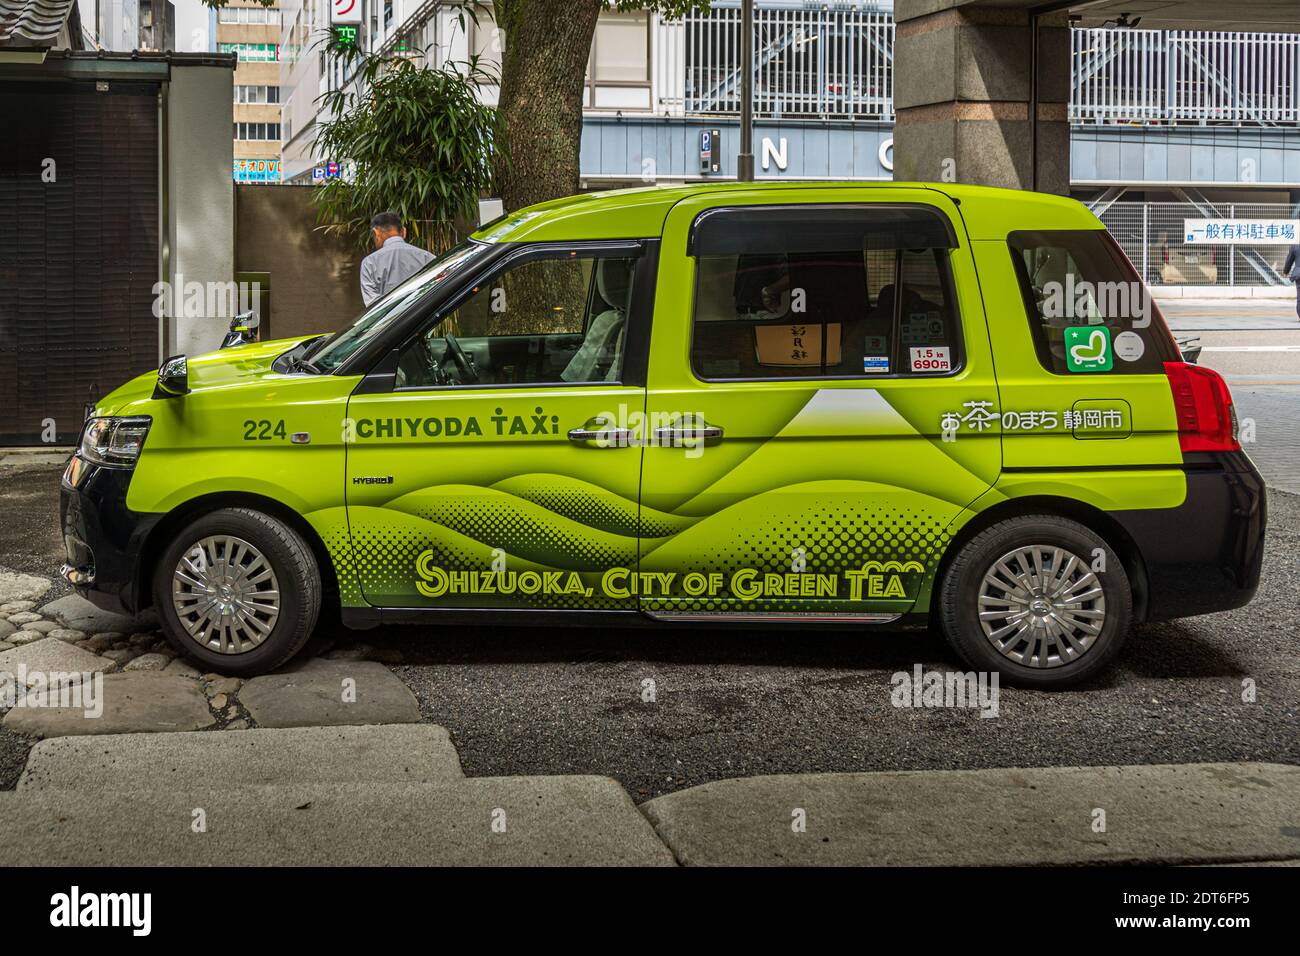 Shizuoka City of Green Tea! The monk Shoichi Kokushi would have loved to see how well his plan worked out. If you hop on a green tea cab in Shizuoka City, you can be sure the driver knows the way out to tea farmers and tasting options. Chiyoda Green Taxi of Shizuoka, Japan Stock Photo